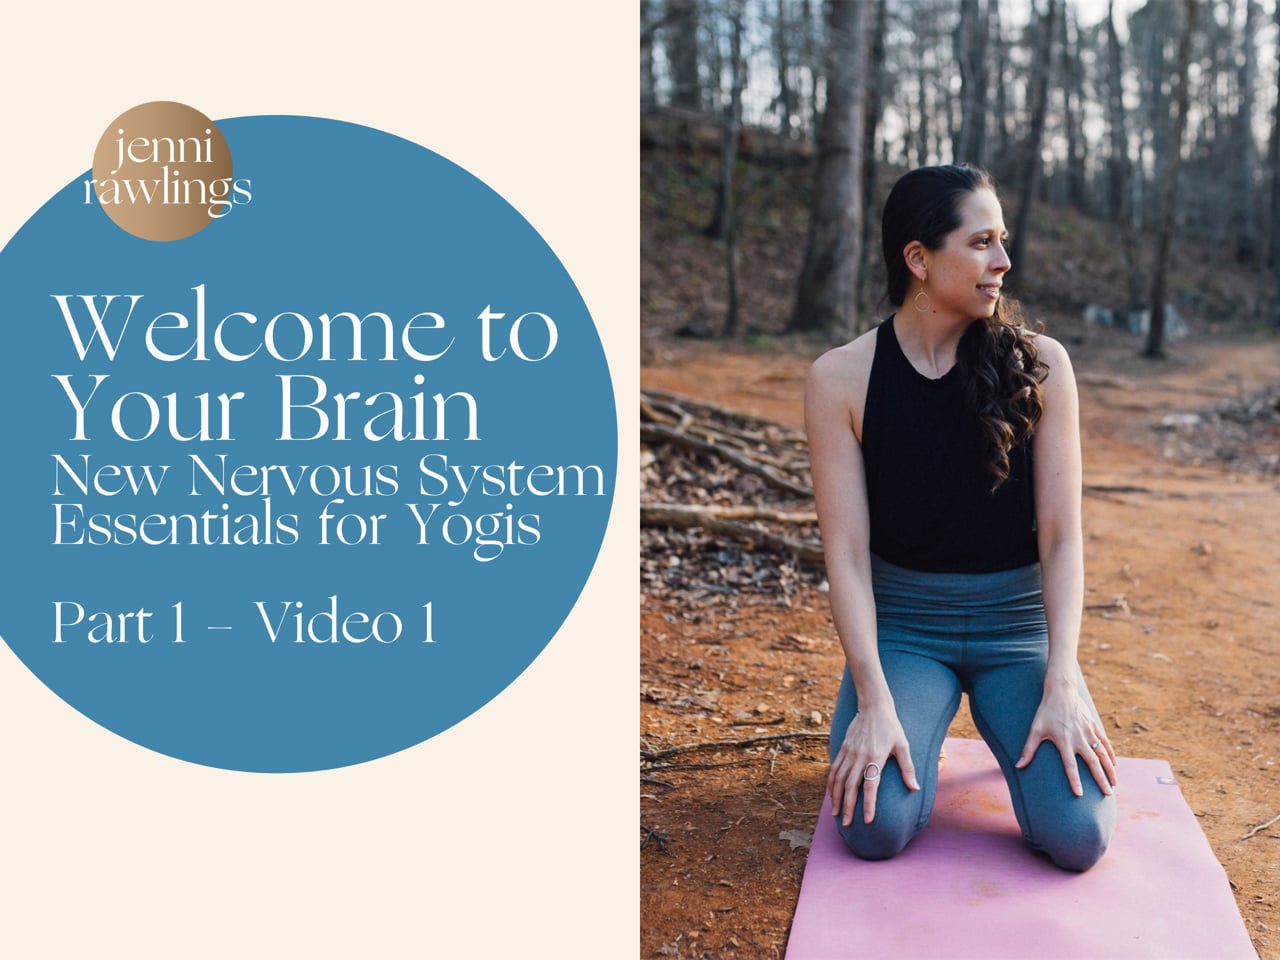 Part 1 Video 1 – Welcome to Your Brain